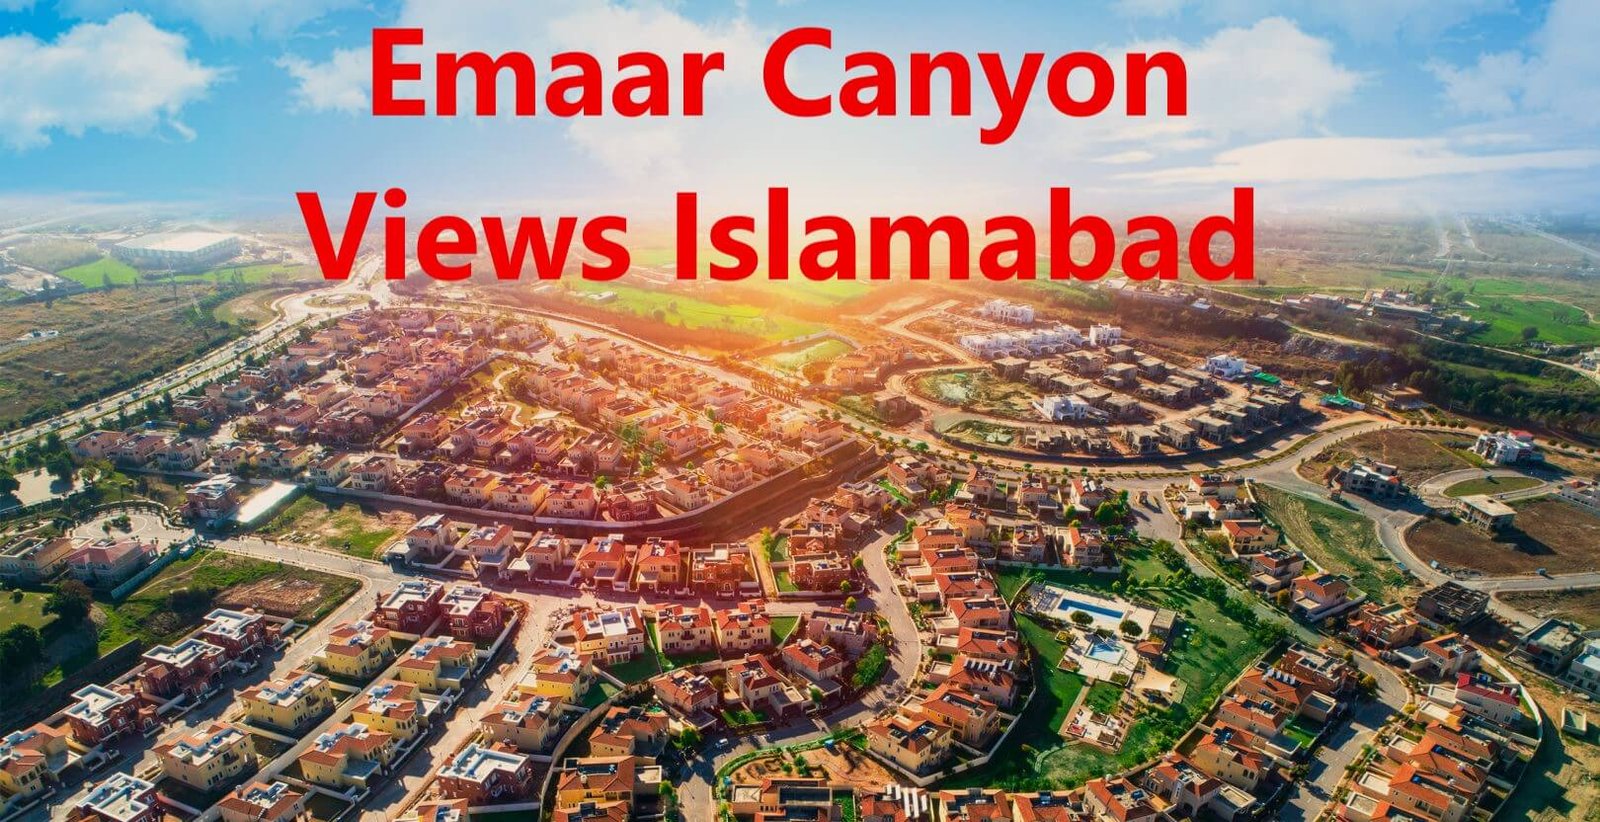 You are currently viewing Emaar Canyon Views Islamabad